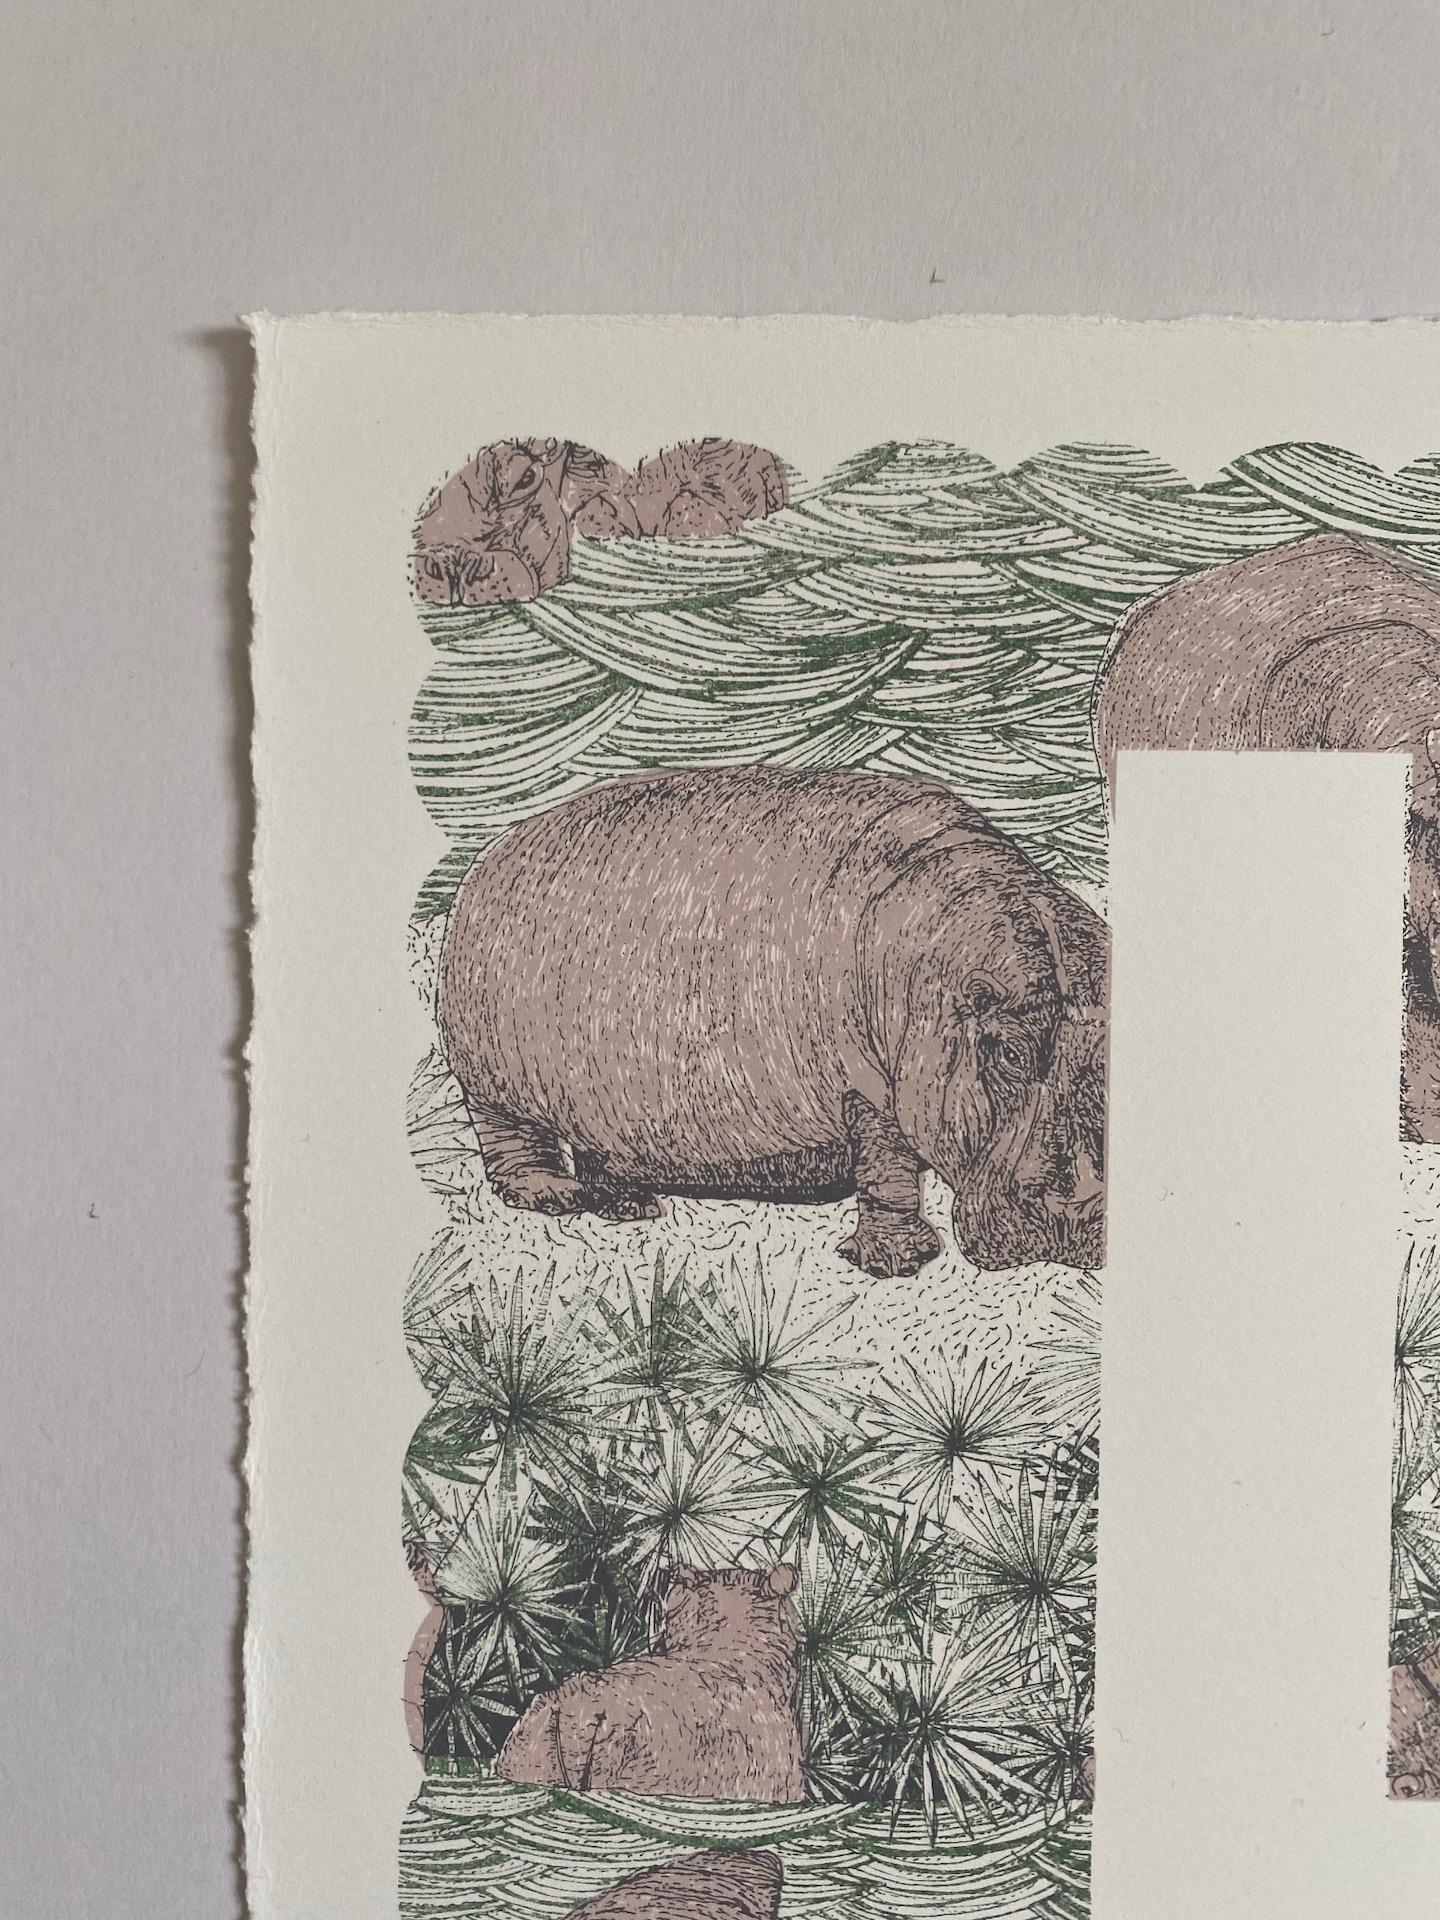 Clare Halifax
H is for Hippo
Limited Edition 3colour screen print
Edition of 100
Sheet Size: H 38cm x W 37cm x 0.1cm
Sold Unframed
Hand printed by the artist onto somerset satin paper 300gms with deckle edge.
Please Note that in situ images are